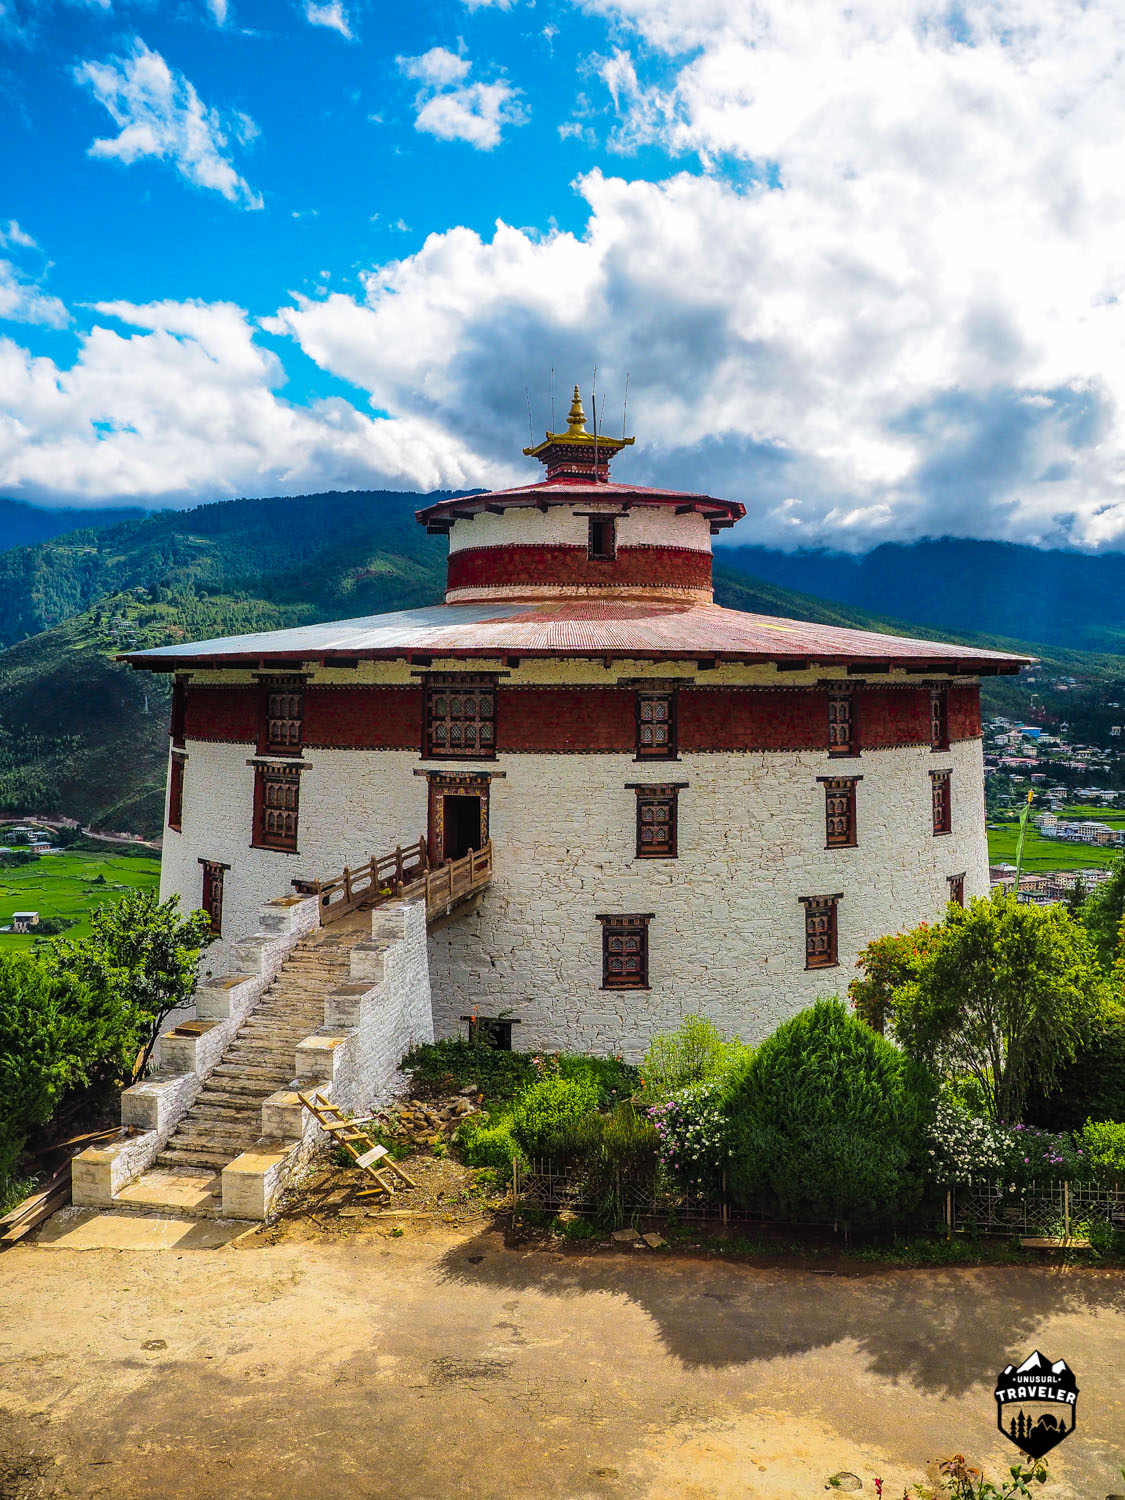  the National Museum has in its possession over 3,000 works of Bhutanese art, covering more than 1,500 years of Bhutan's cultural heritage. Its rich holdings of various creative traditions and disciplines, represent a remarkable blend of the past with the present and is a major attraction for local and foreign visitors.